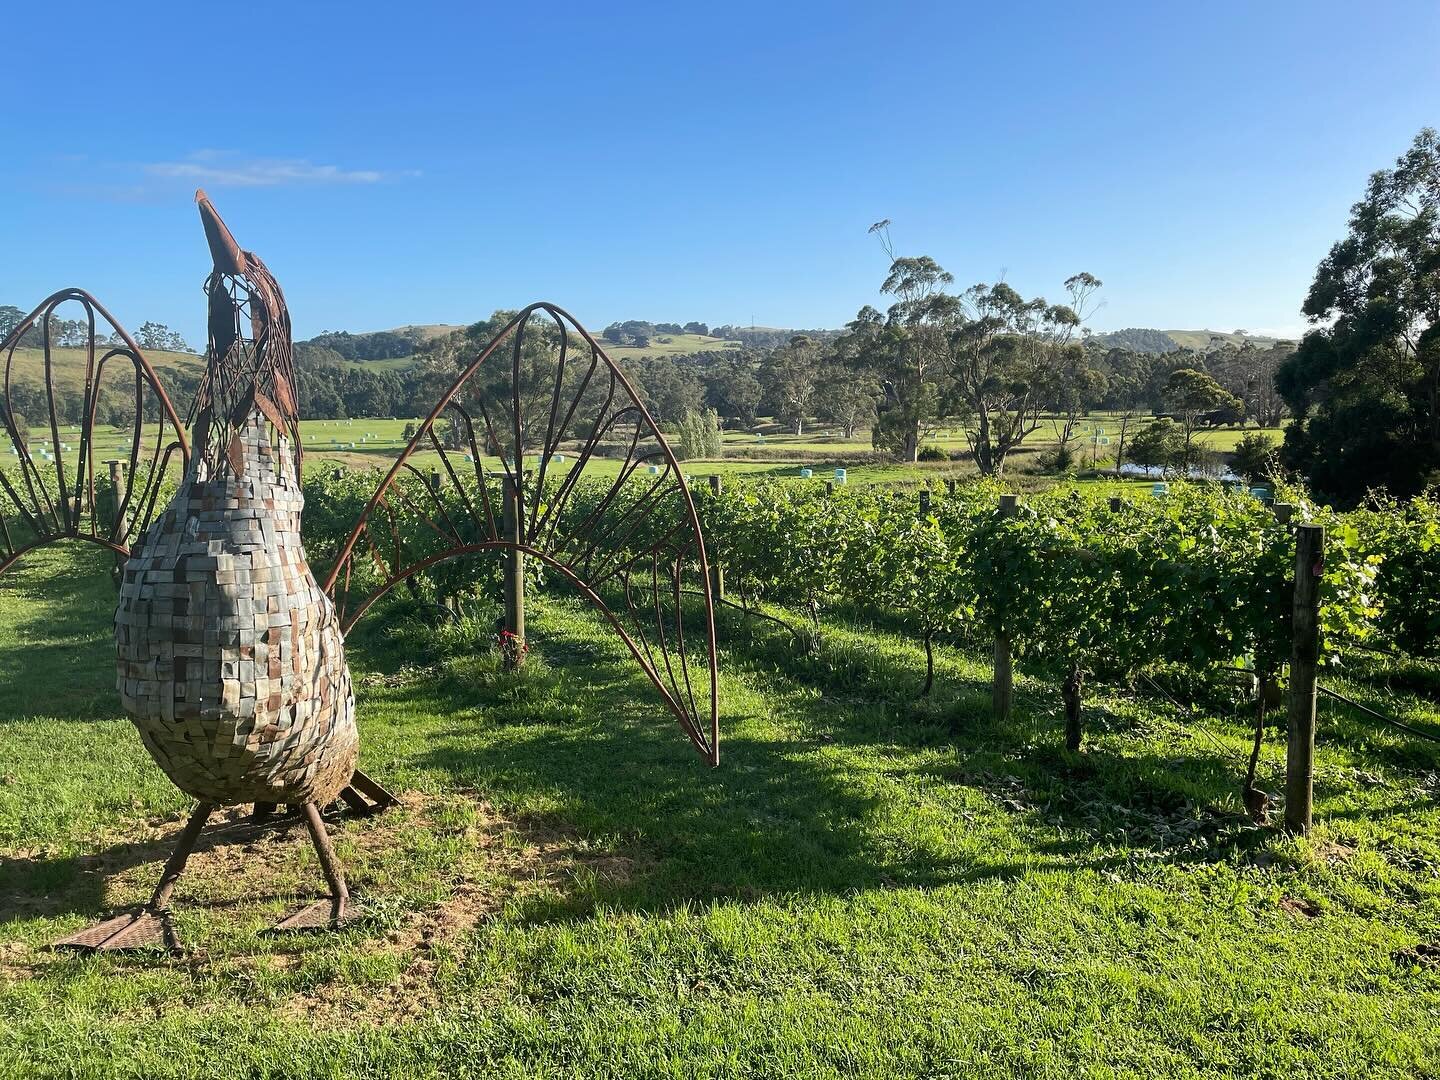 What a cracker of a day!
The guys are in the vineyards and Jane&rsquo;s opening up the Cellar Door today for shoppers &amp; sippers- drop by between 12 and 5.
#takeabreak
#greatgippslandwine 
#localgifts 
#lovelochvillage 
#vigneronatwork